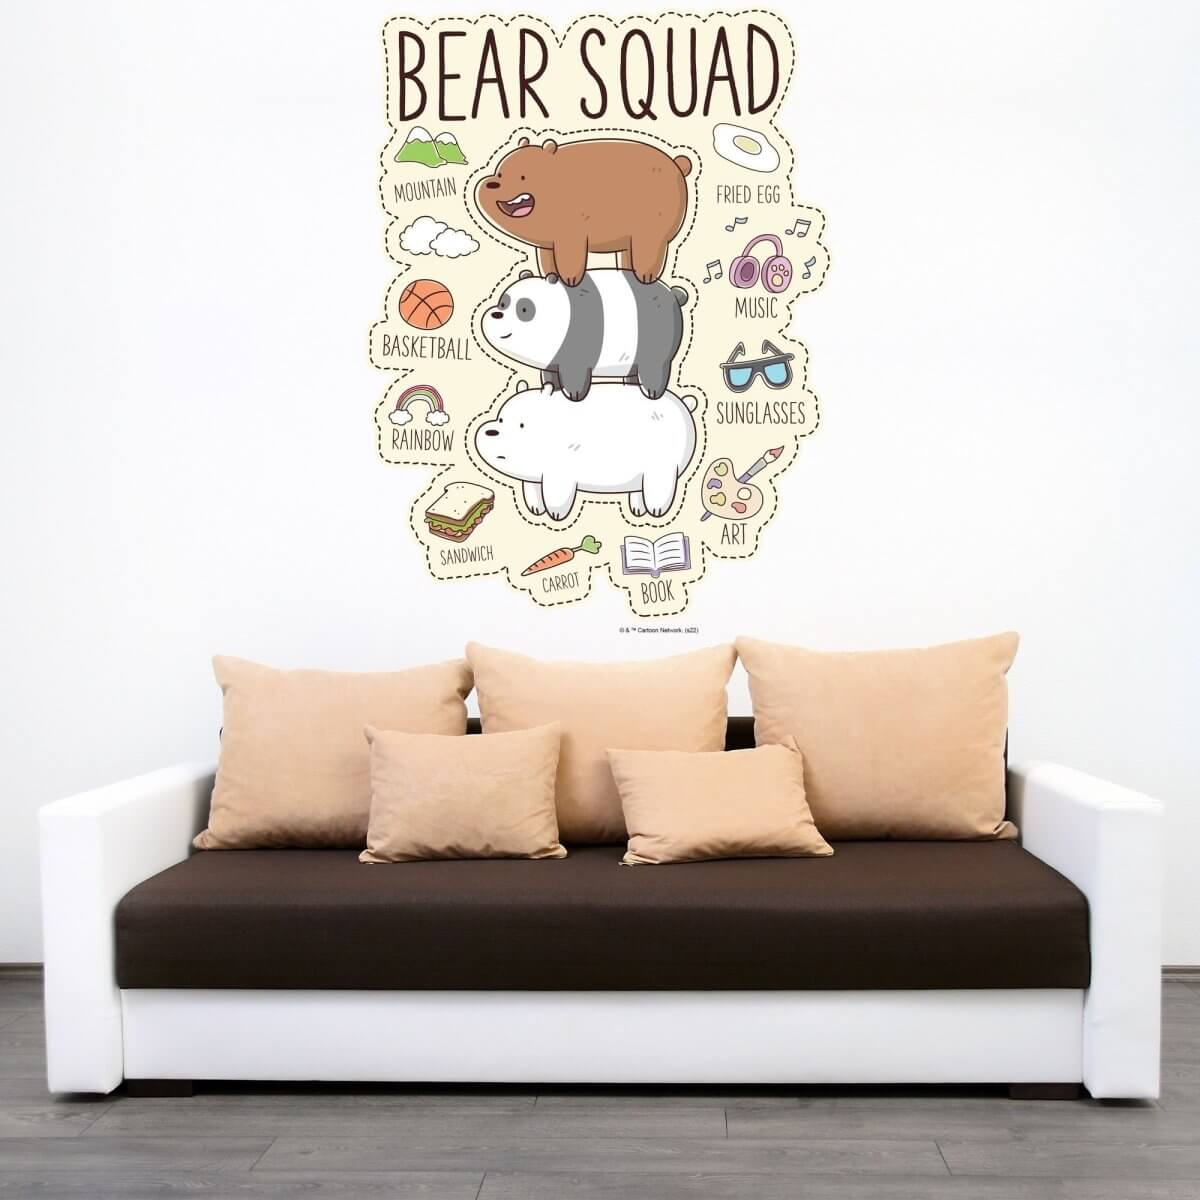 Kismet Decals Home & Room Decor We Bare Bears Squad Hobbies Wall decal sticker - officially licensed - latex printed with no solvent odor - Kismet Decals